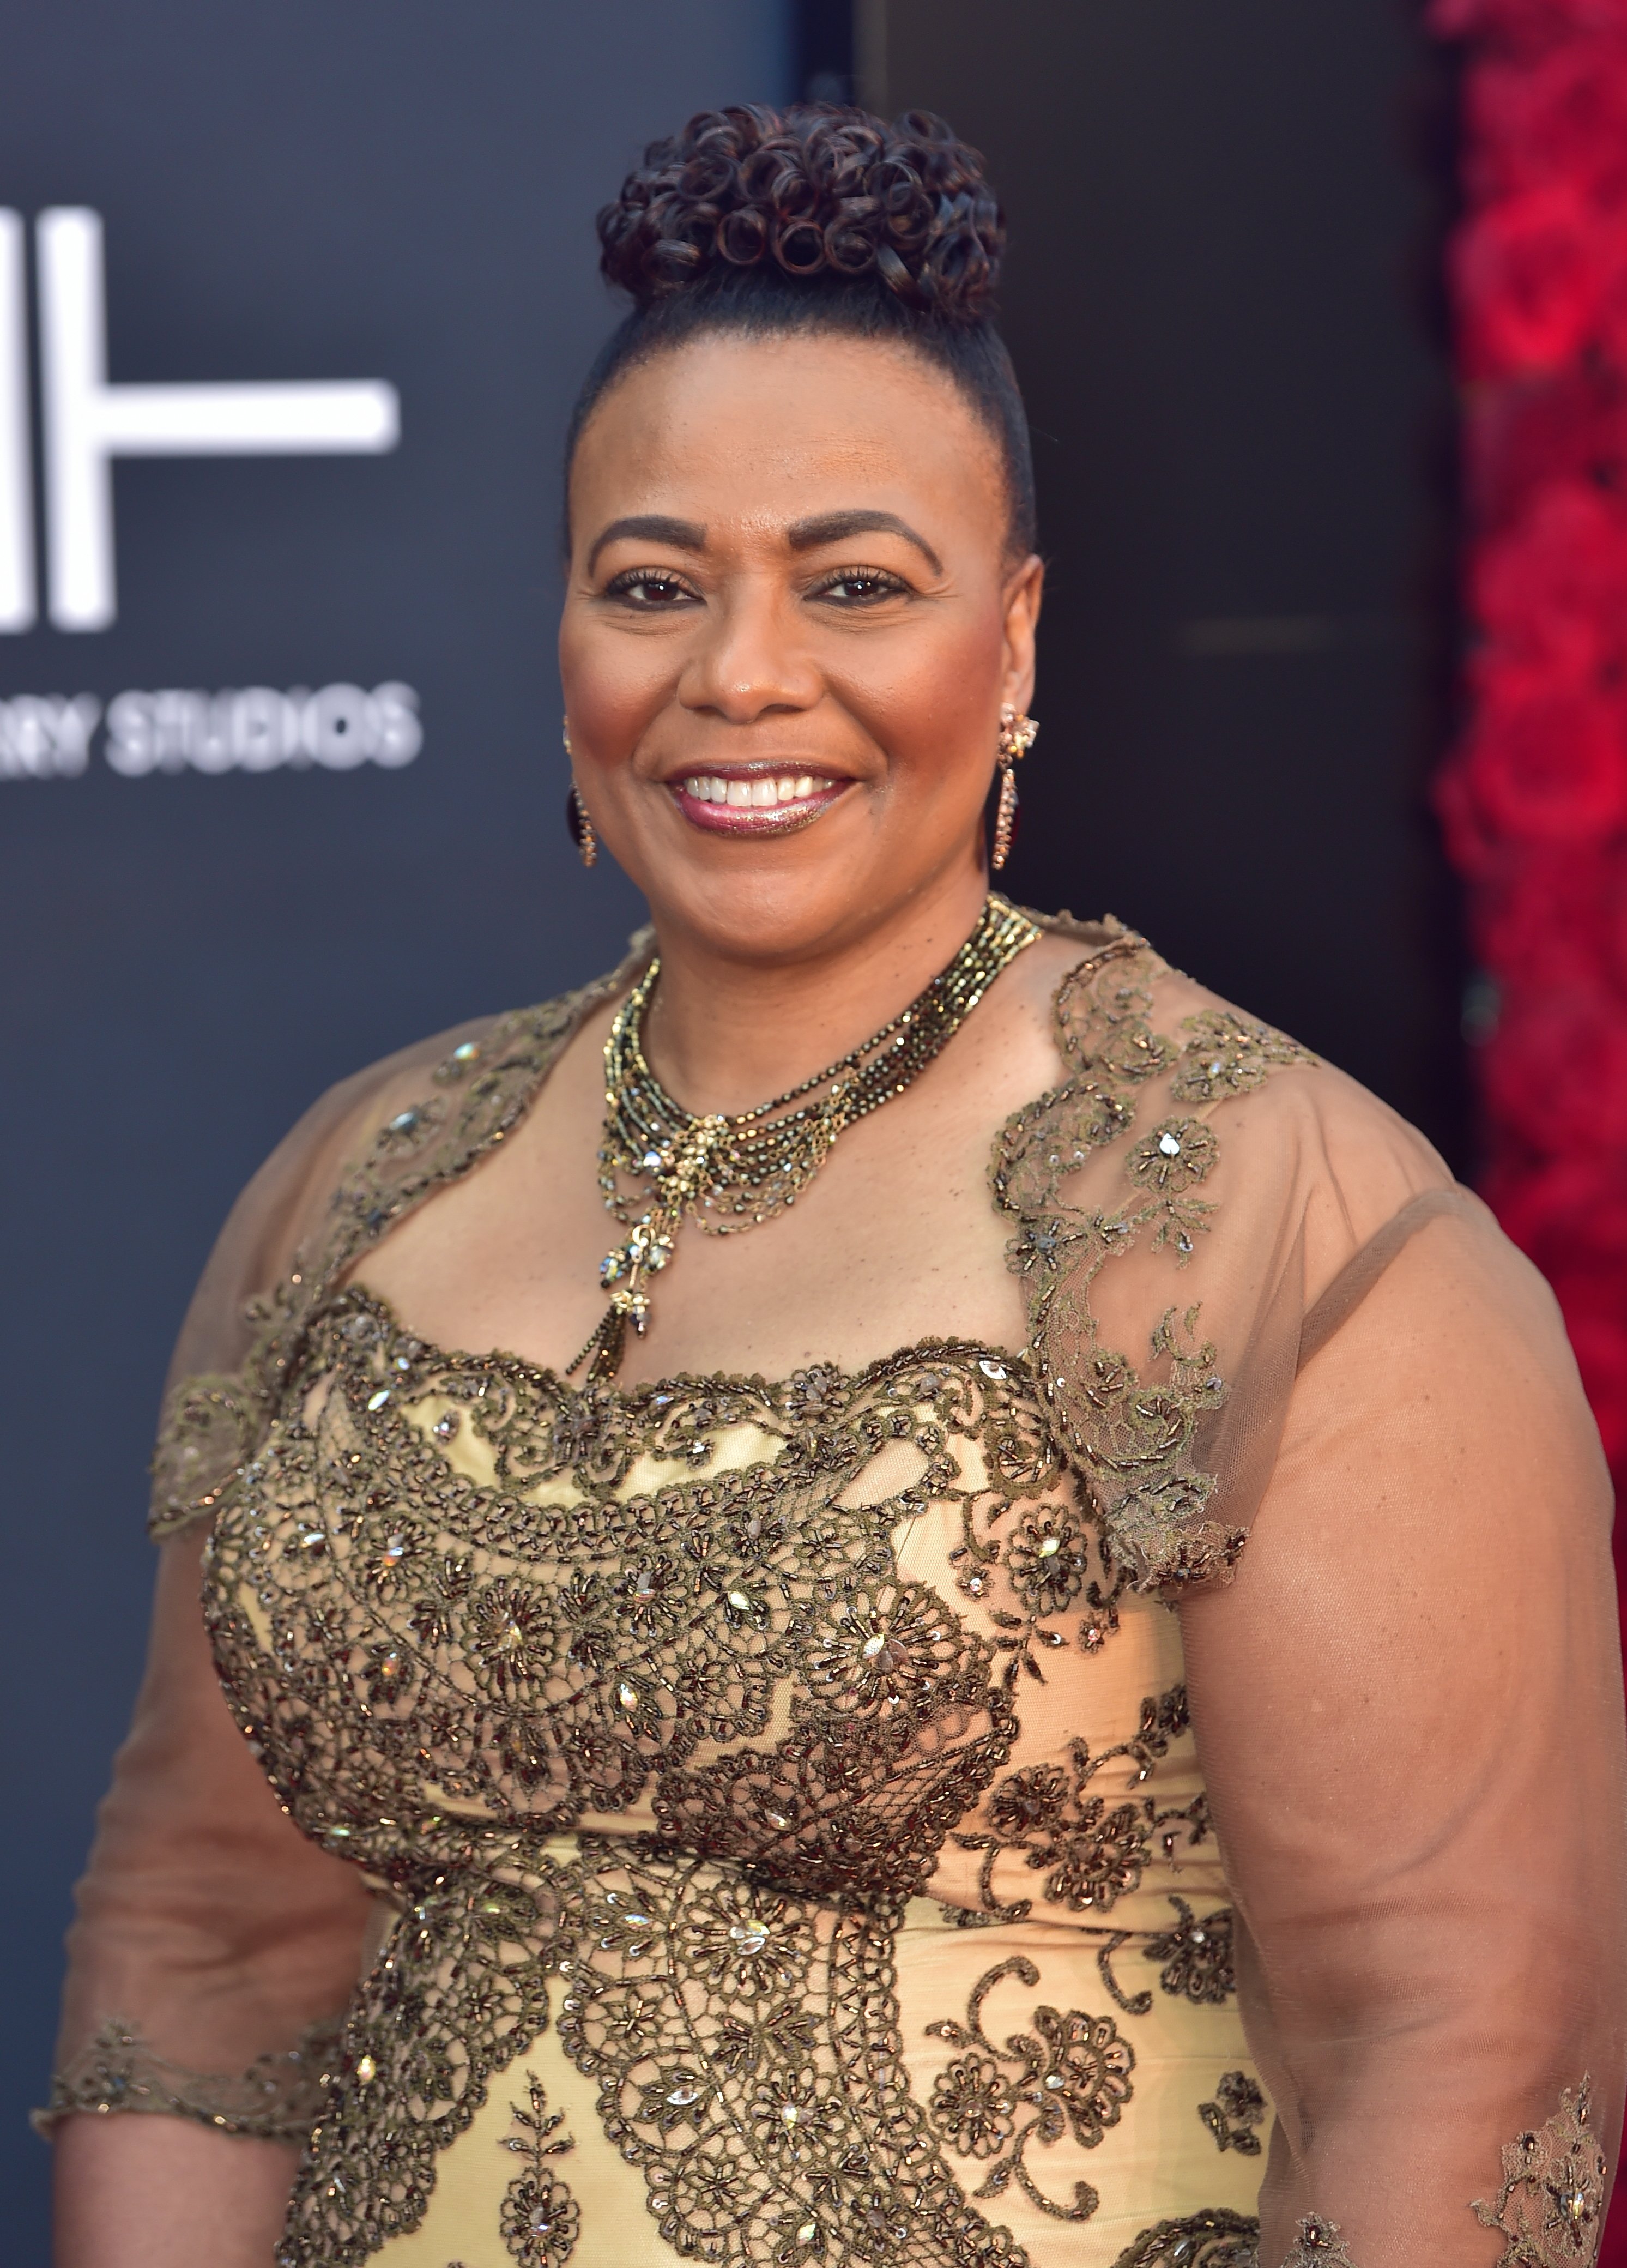 Bernice King attends Tyler Perry Studios Grand Opening Gala - Arrivals at Tyler Perry Studios on October 5, 2019 | Photo: Getty Images